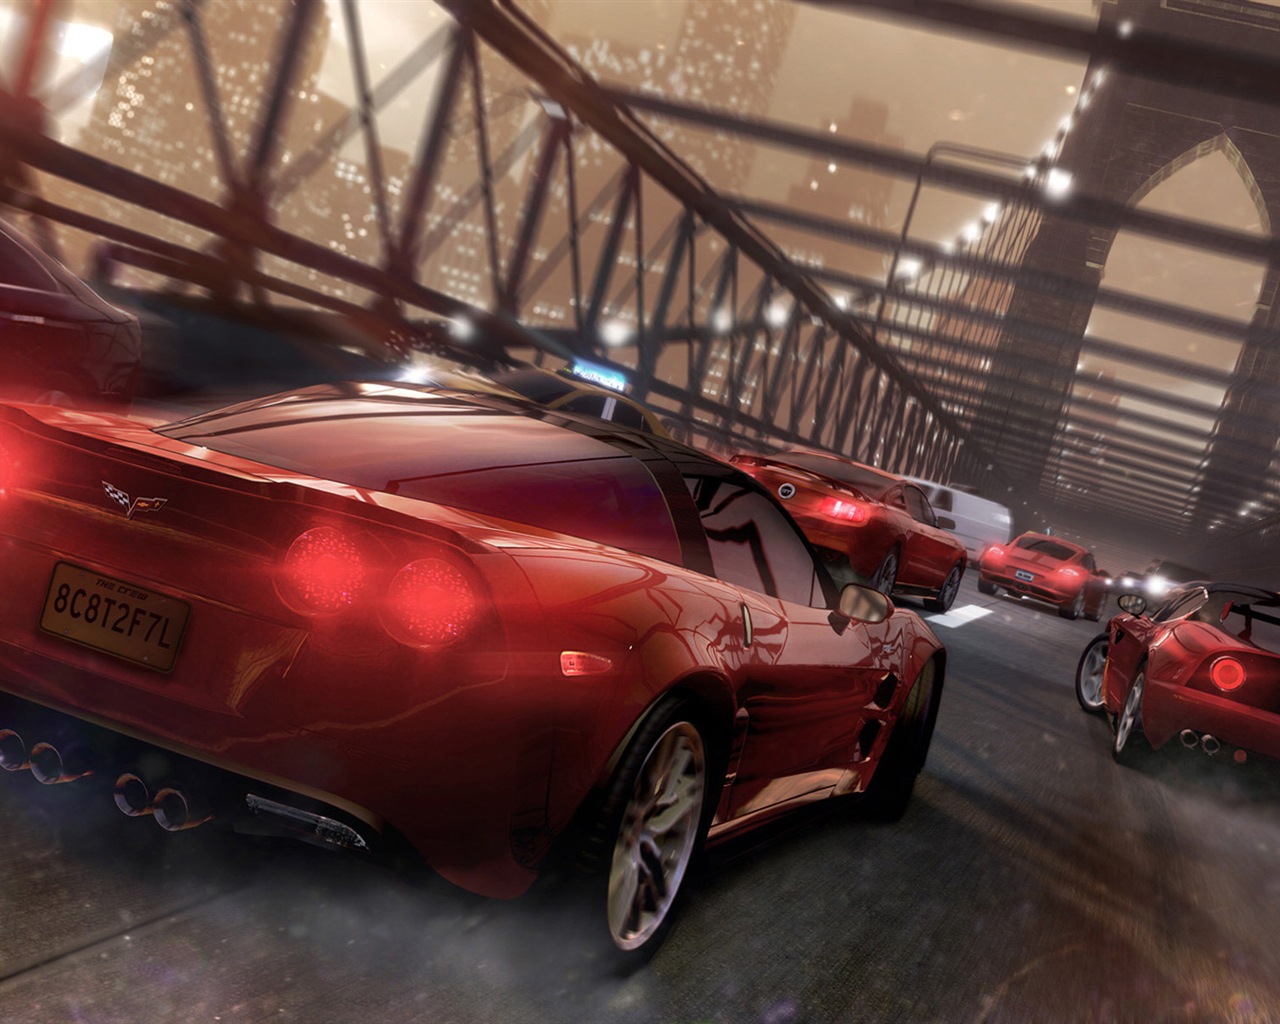 The Crew game HD wallpapers #15 - 1280x1024